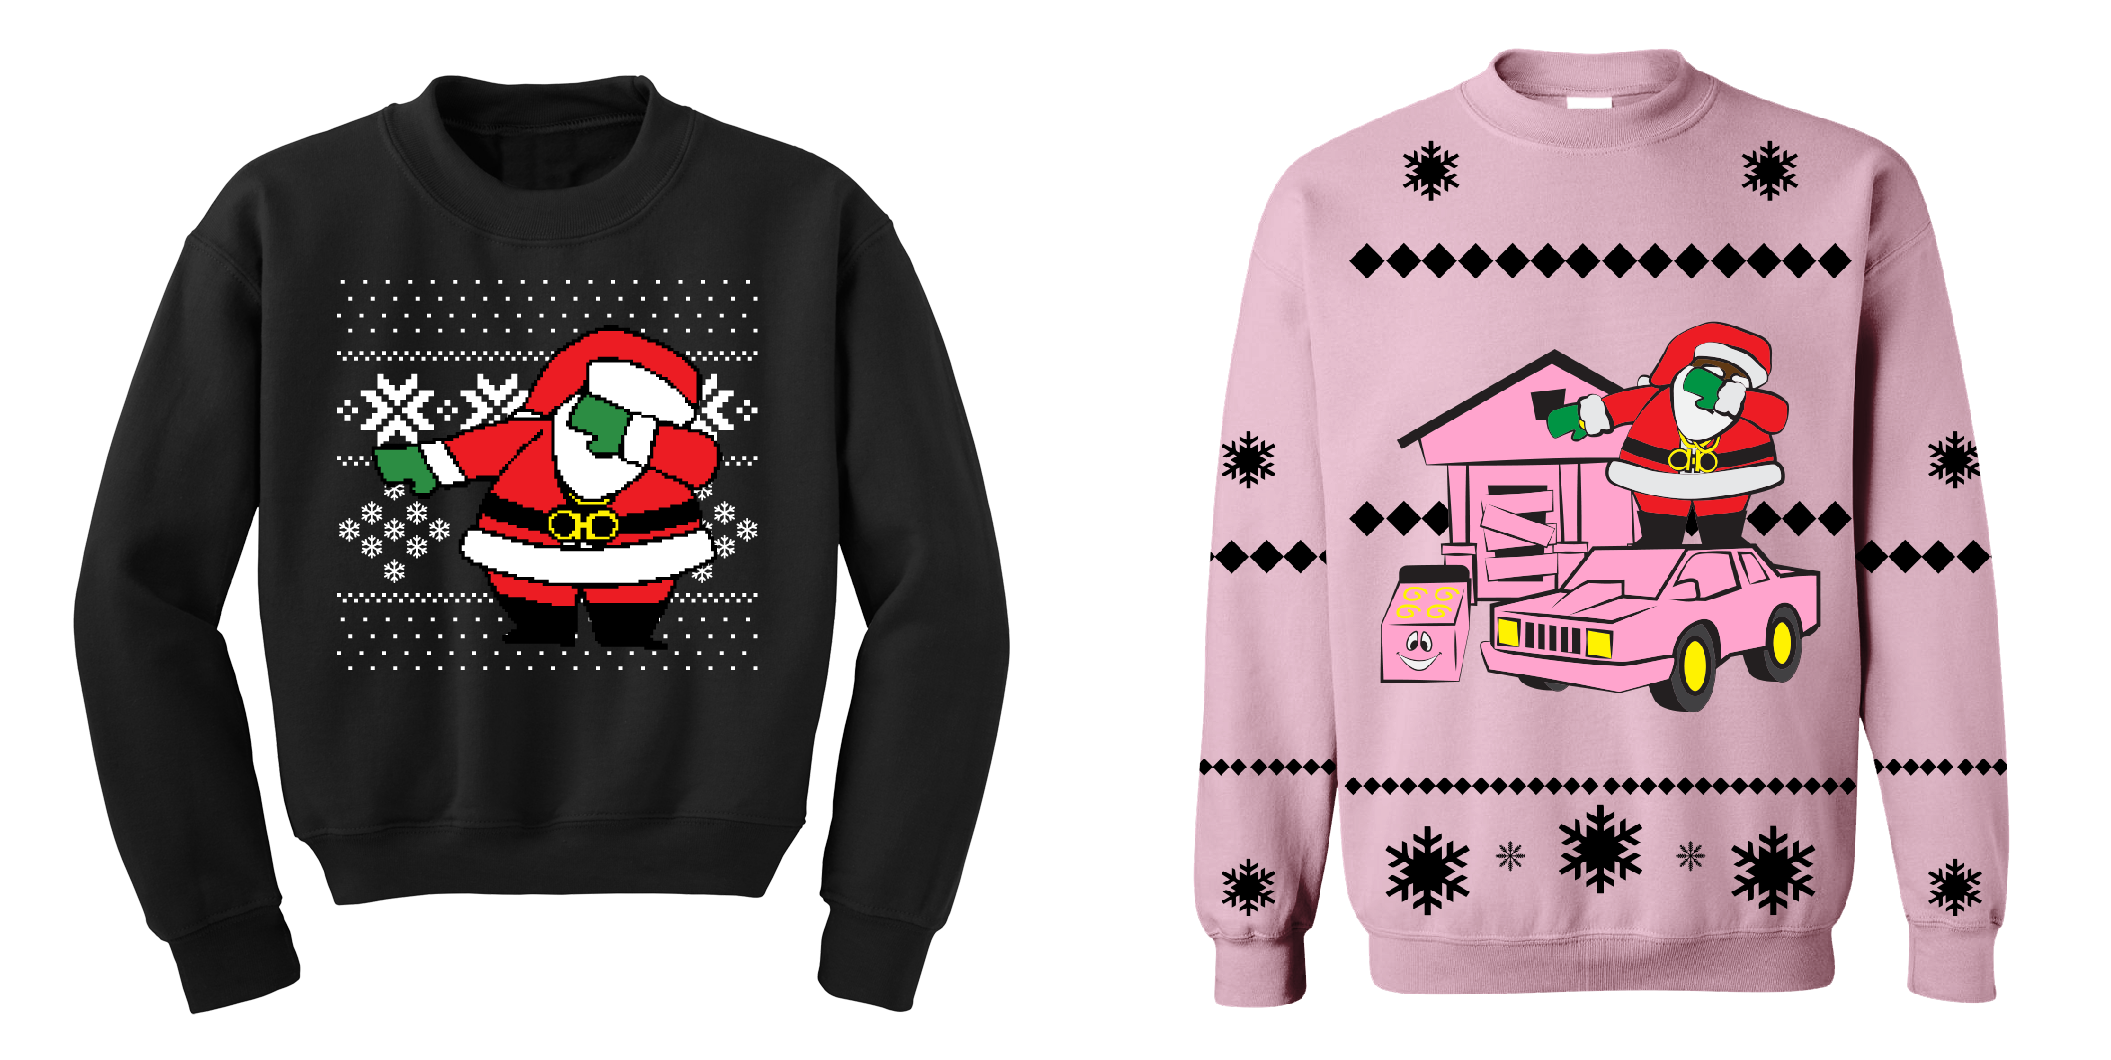 How 2 Chainz Sold $2.1 Million Of Ugly Santa Sweaters In 30 Days